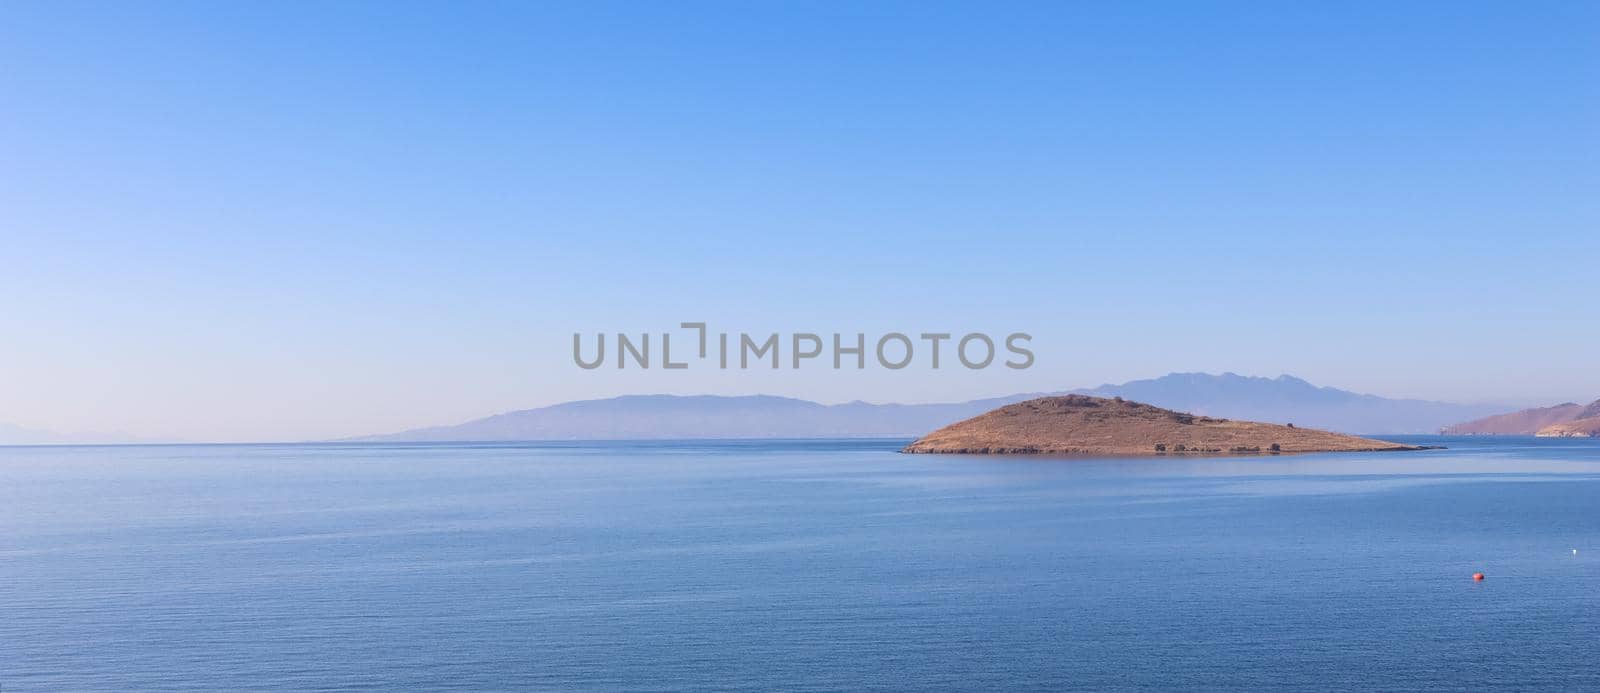 Aegean Sea with calm blue water and islands. Summer holiday concept and travel background by Olayola